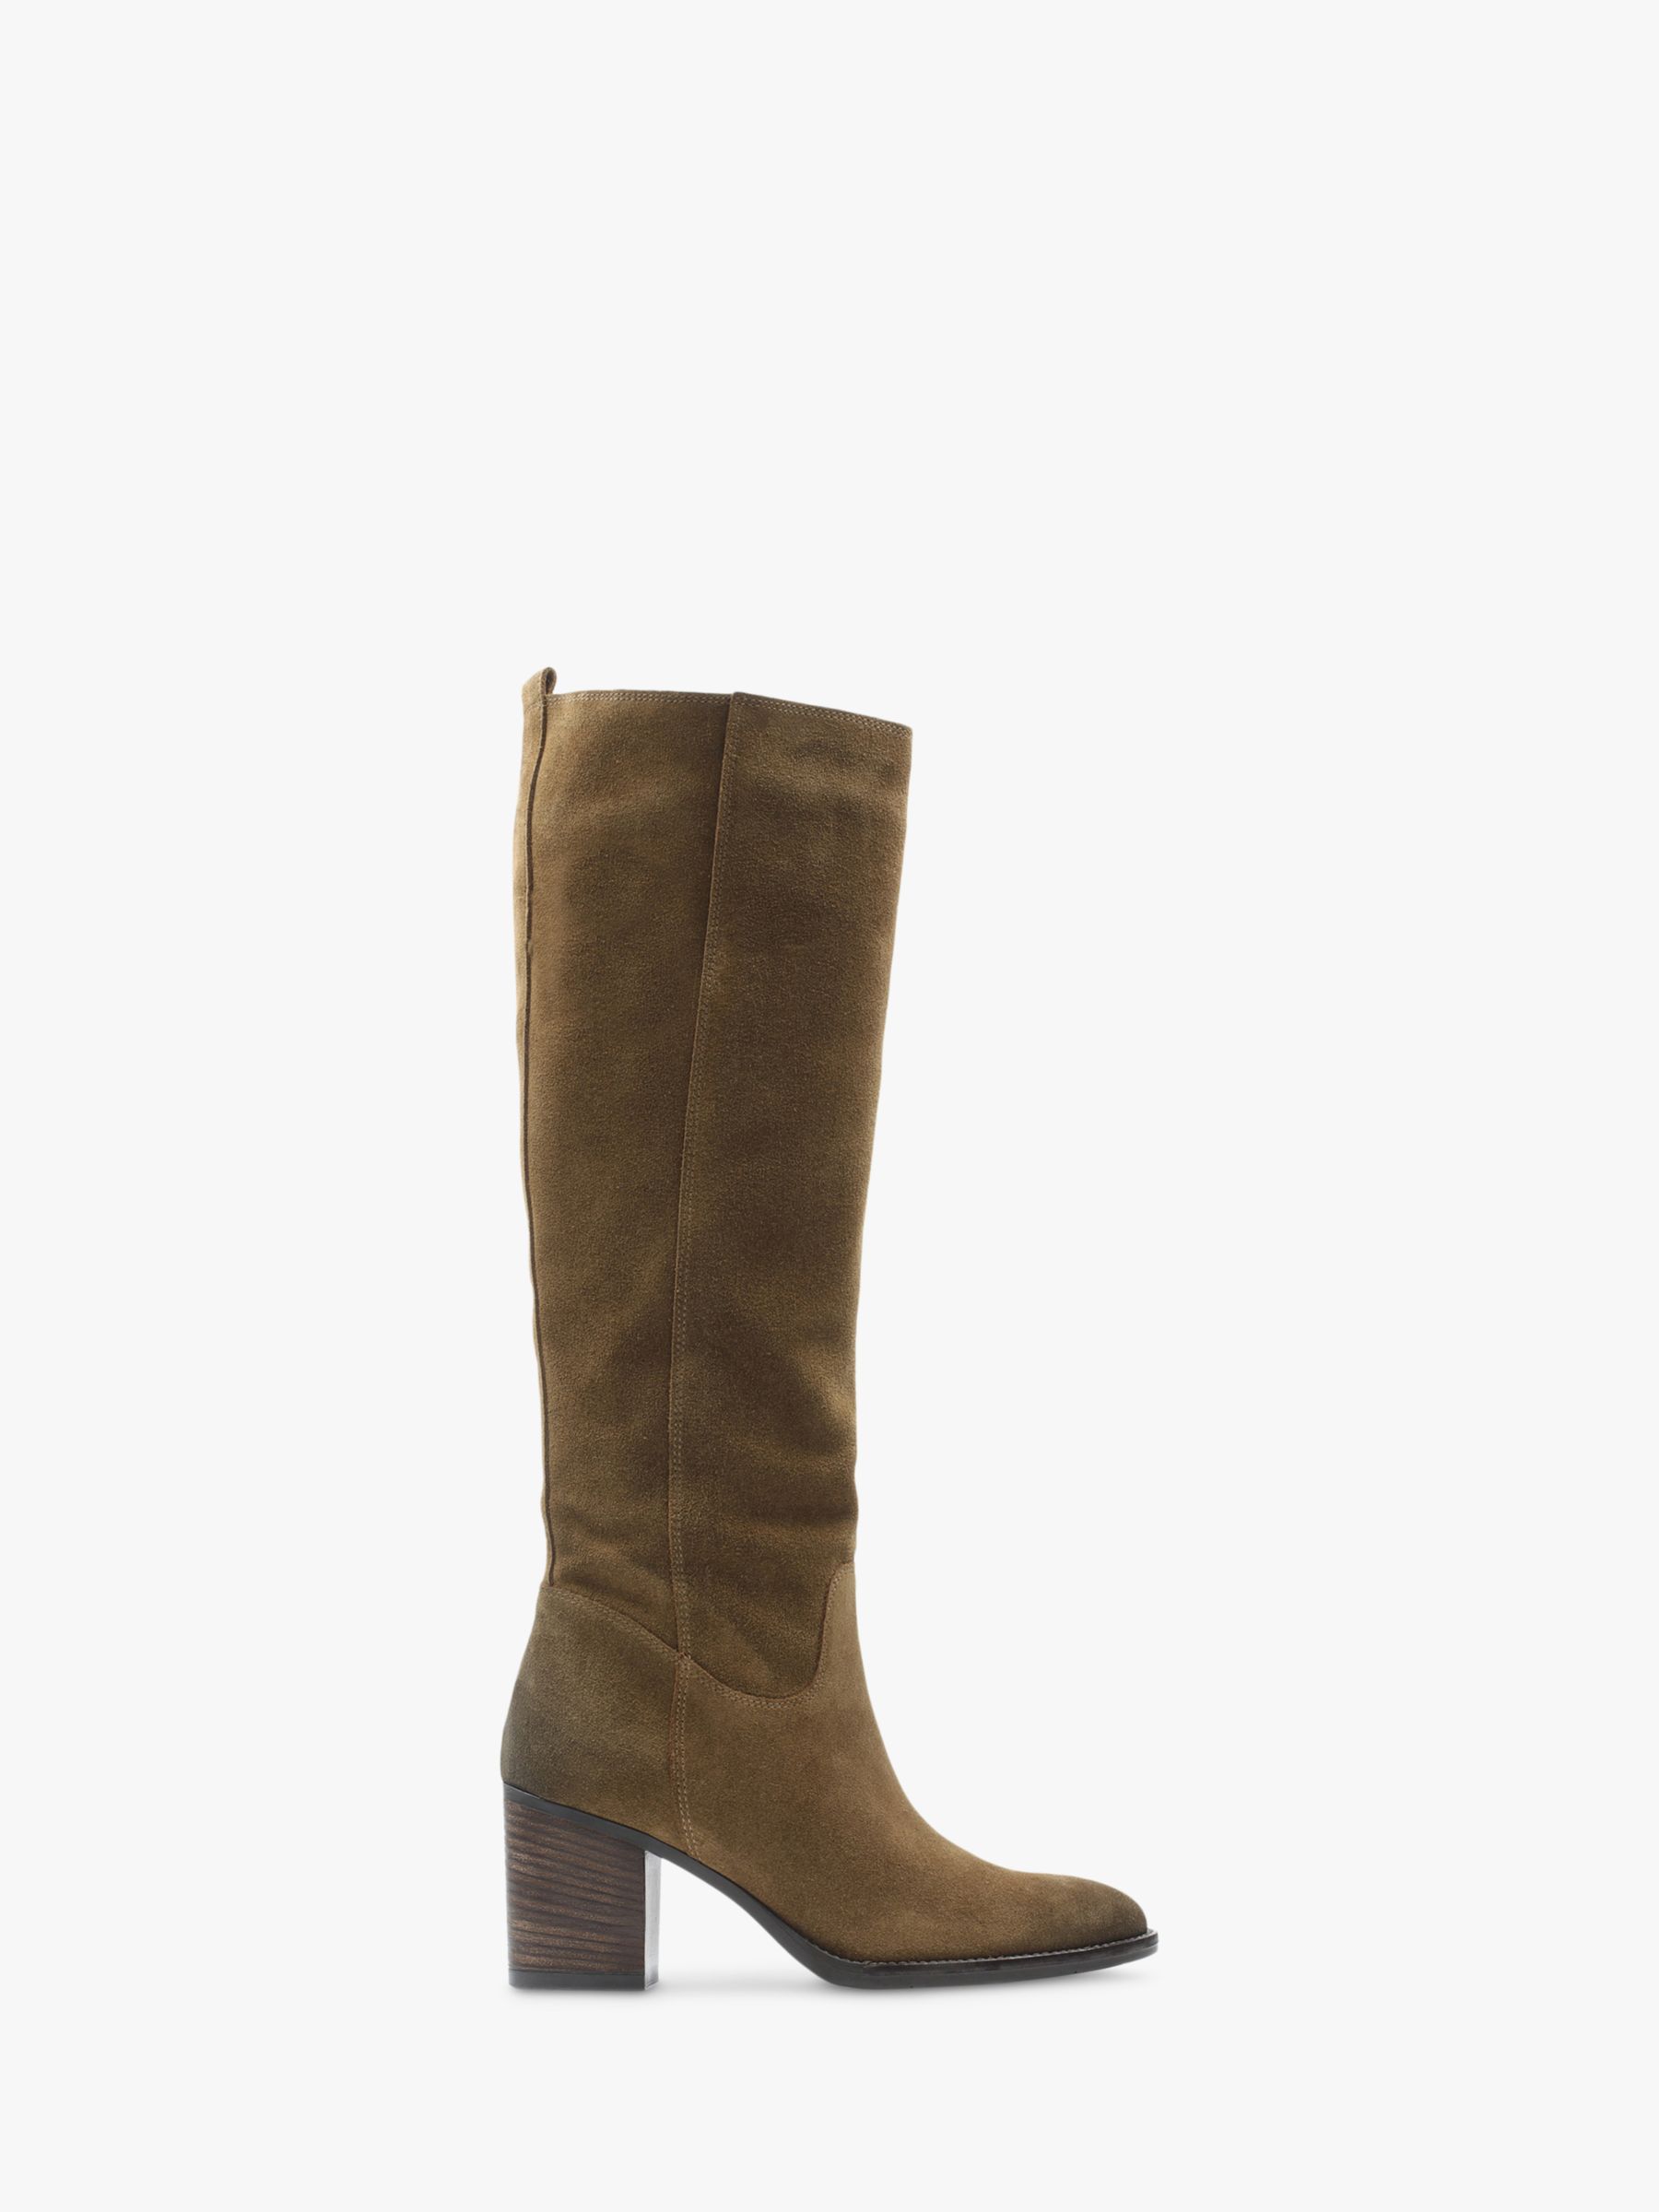 Clarks Park Rise Suede Knee Boots, Tobacco at John Lewis & Partners